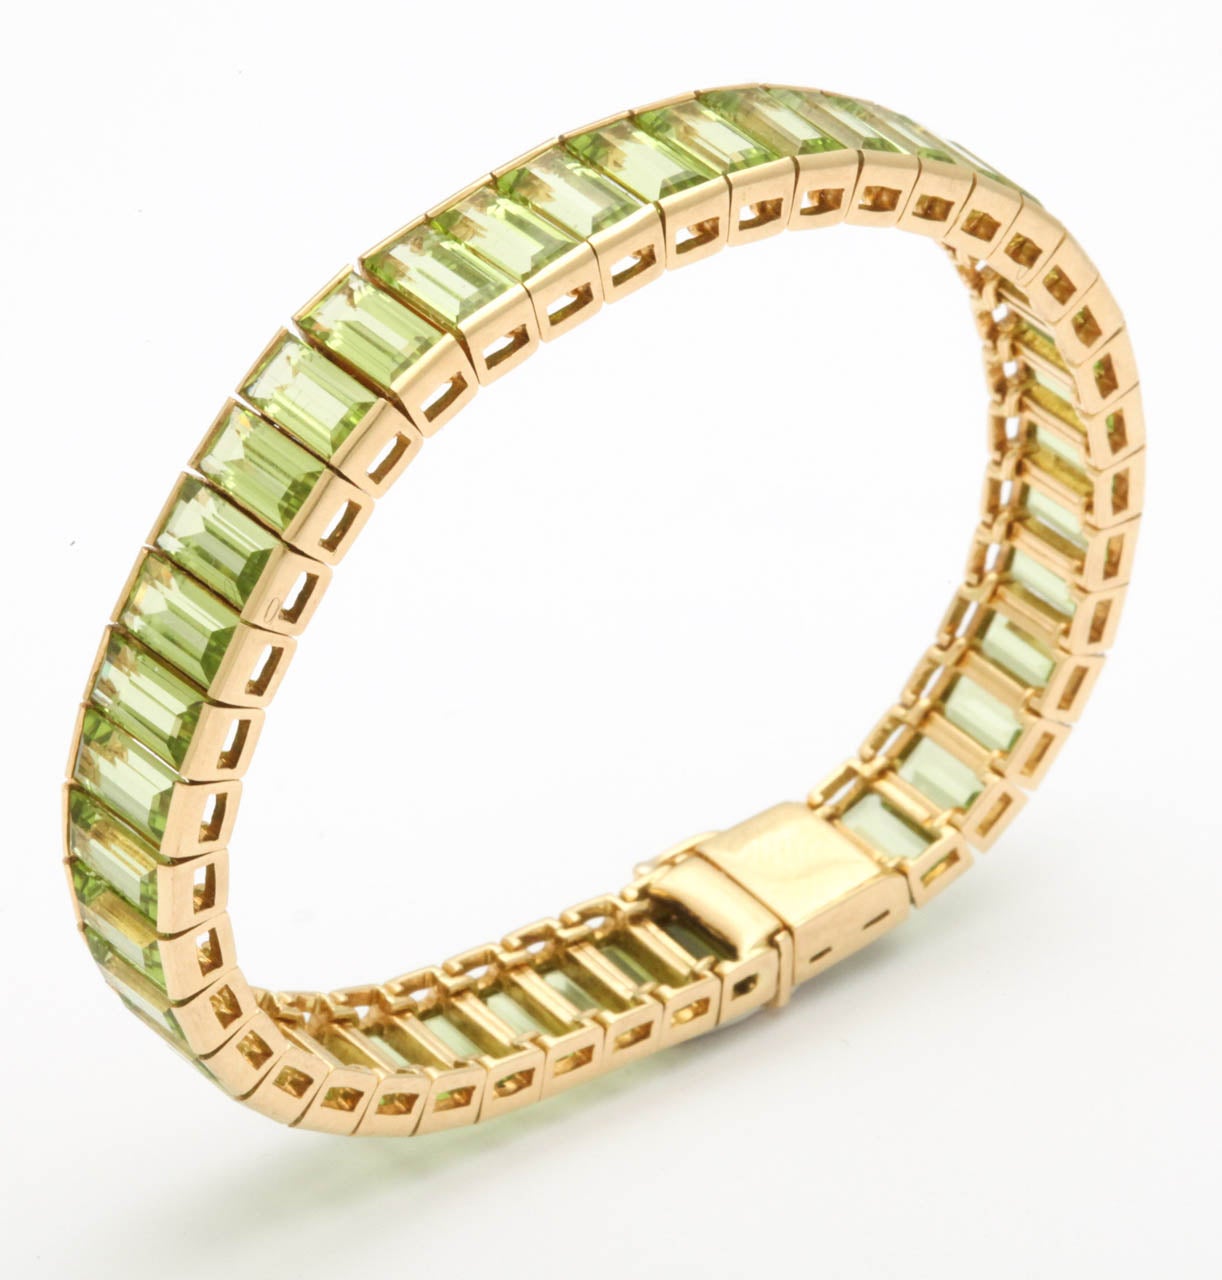 Flexible Square Cut Peridot Straightline Bracelet Made Of 18kt Yellow Gold Total Carat Weight Of Peridot 20 Carats